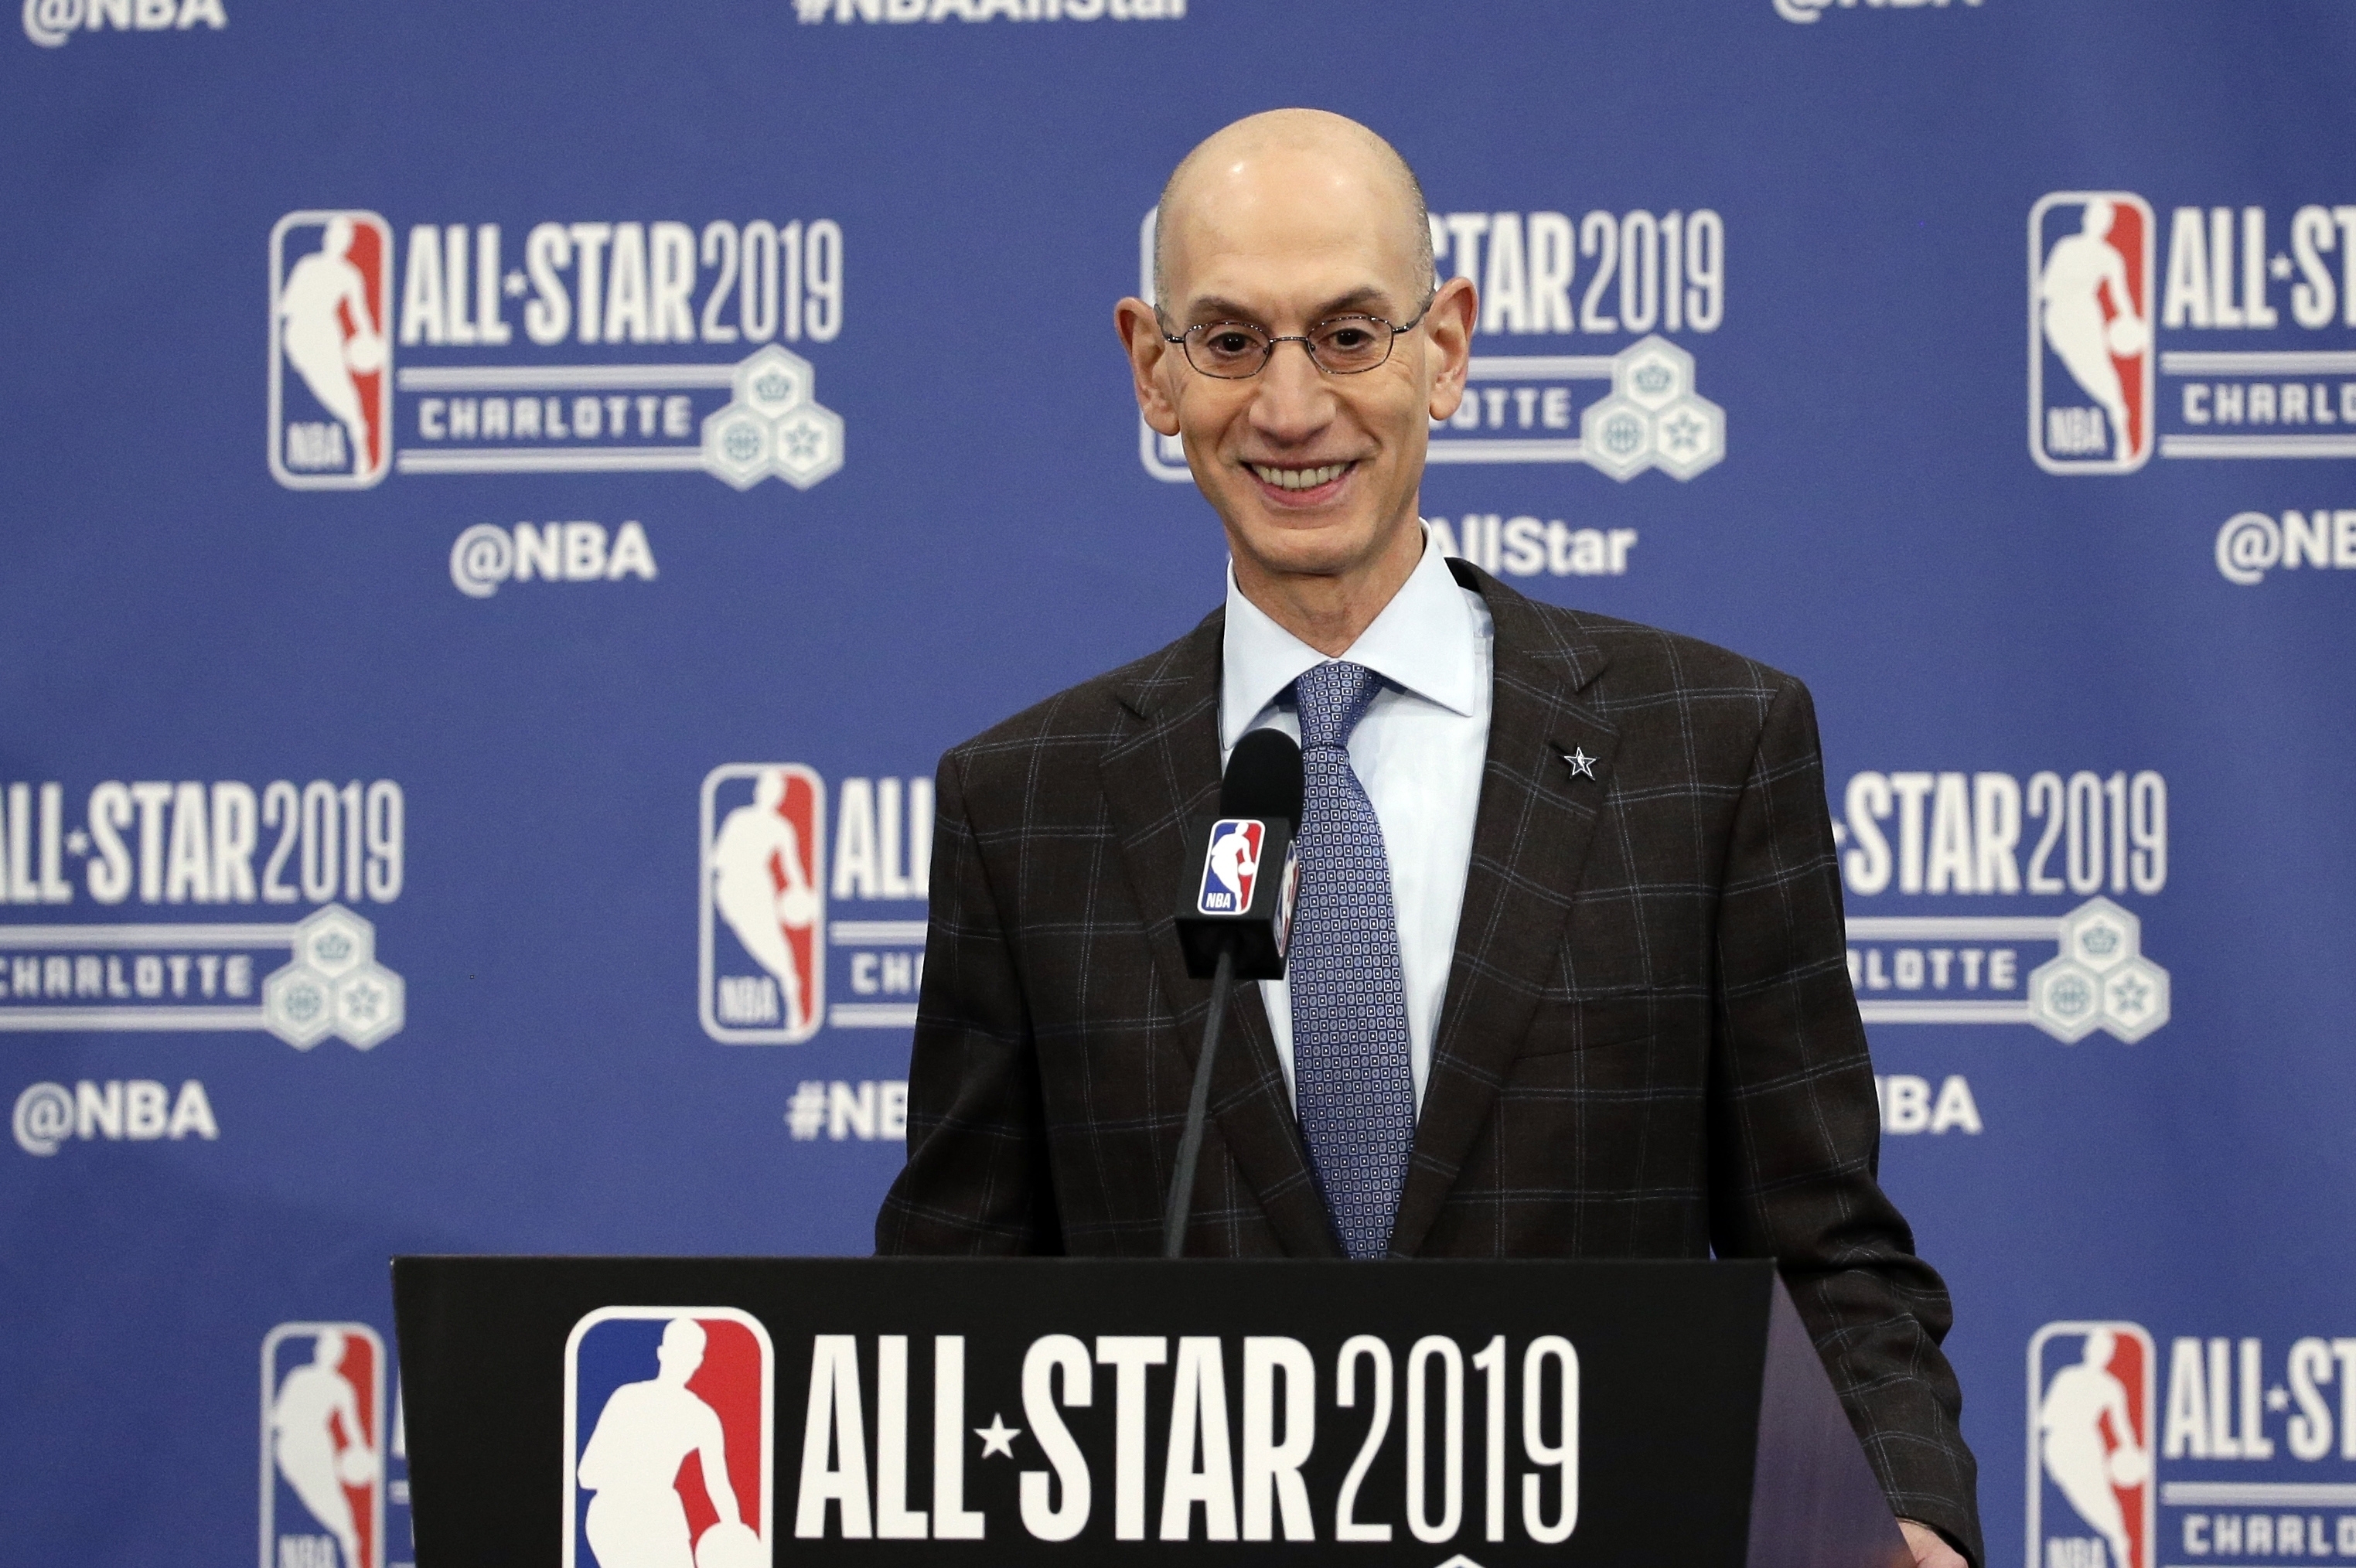 NBA and players' union reportedly discuss All-Star Game - The